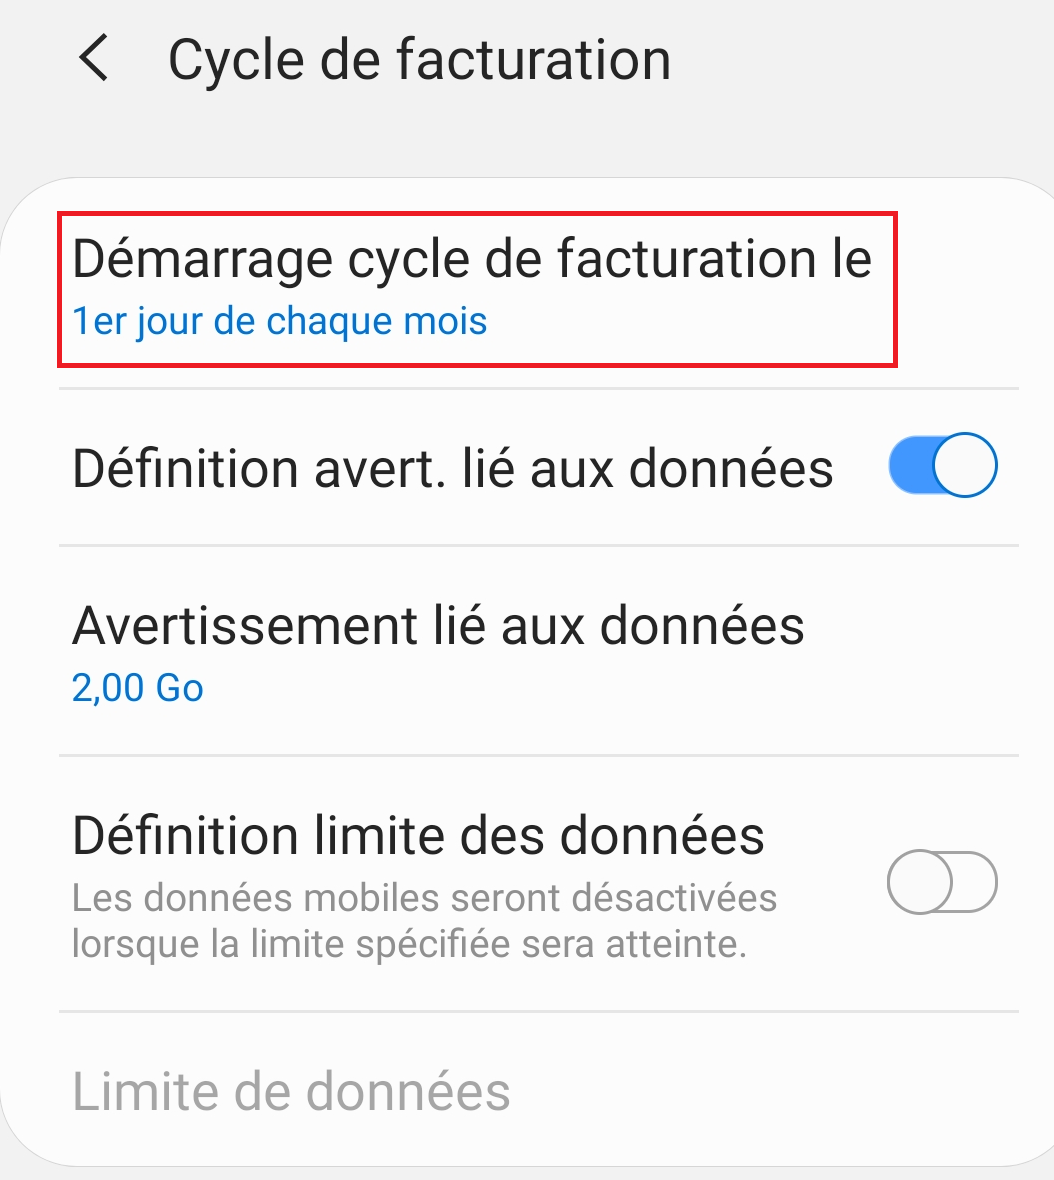 Invoice_cycle1_FR